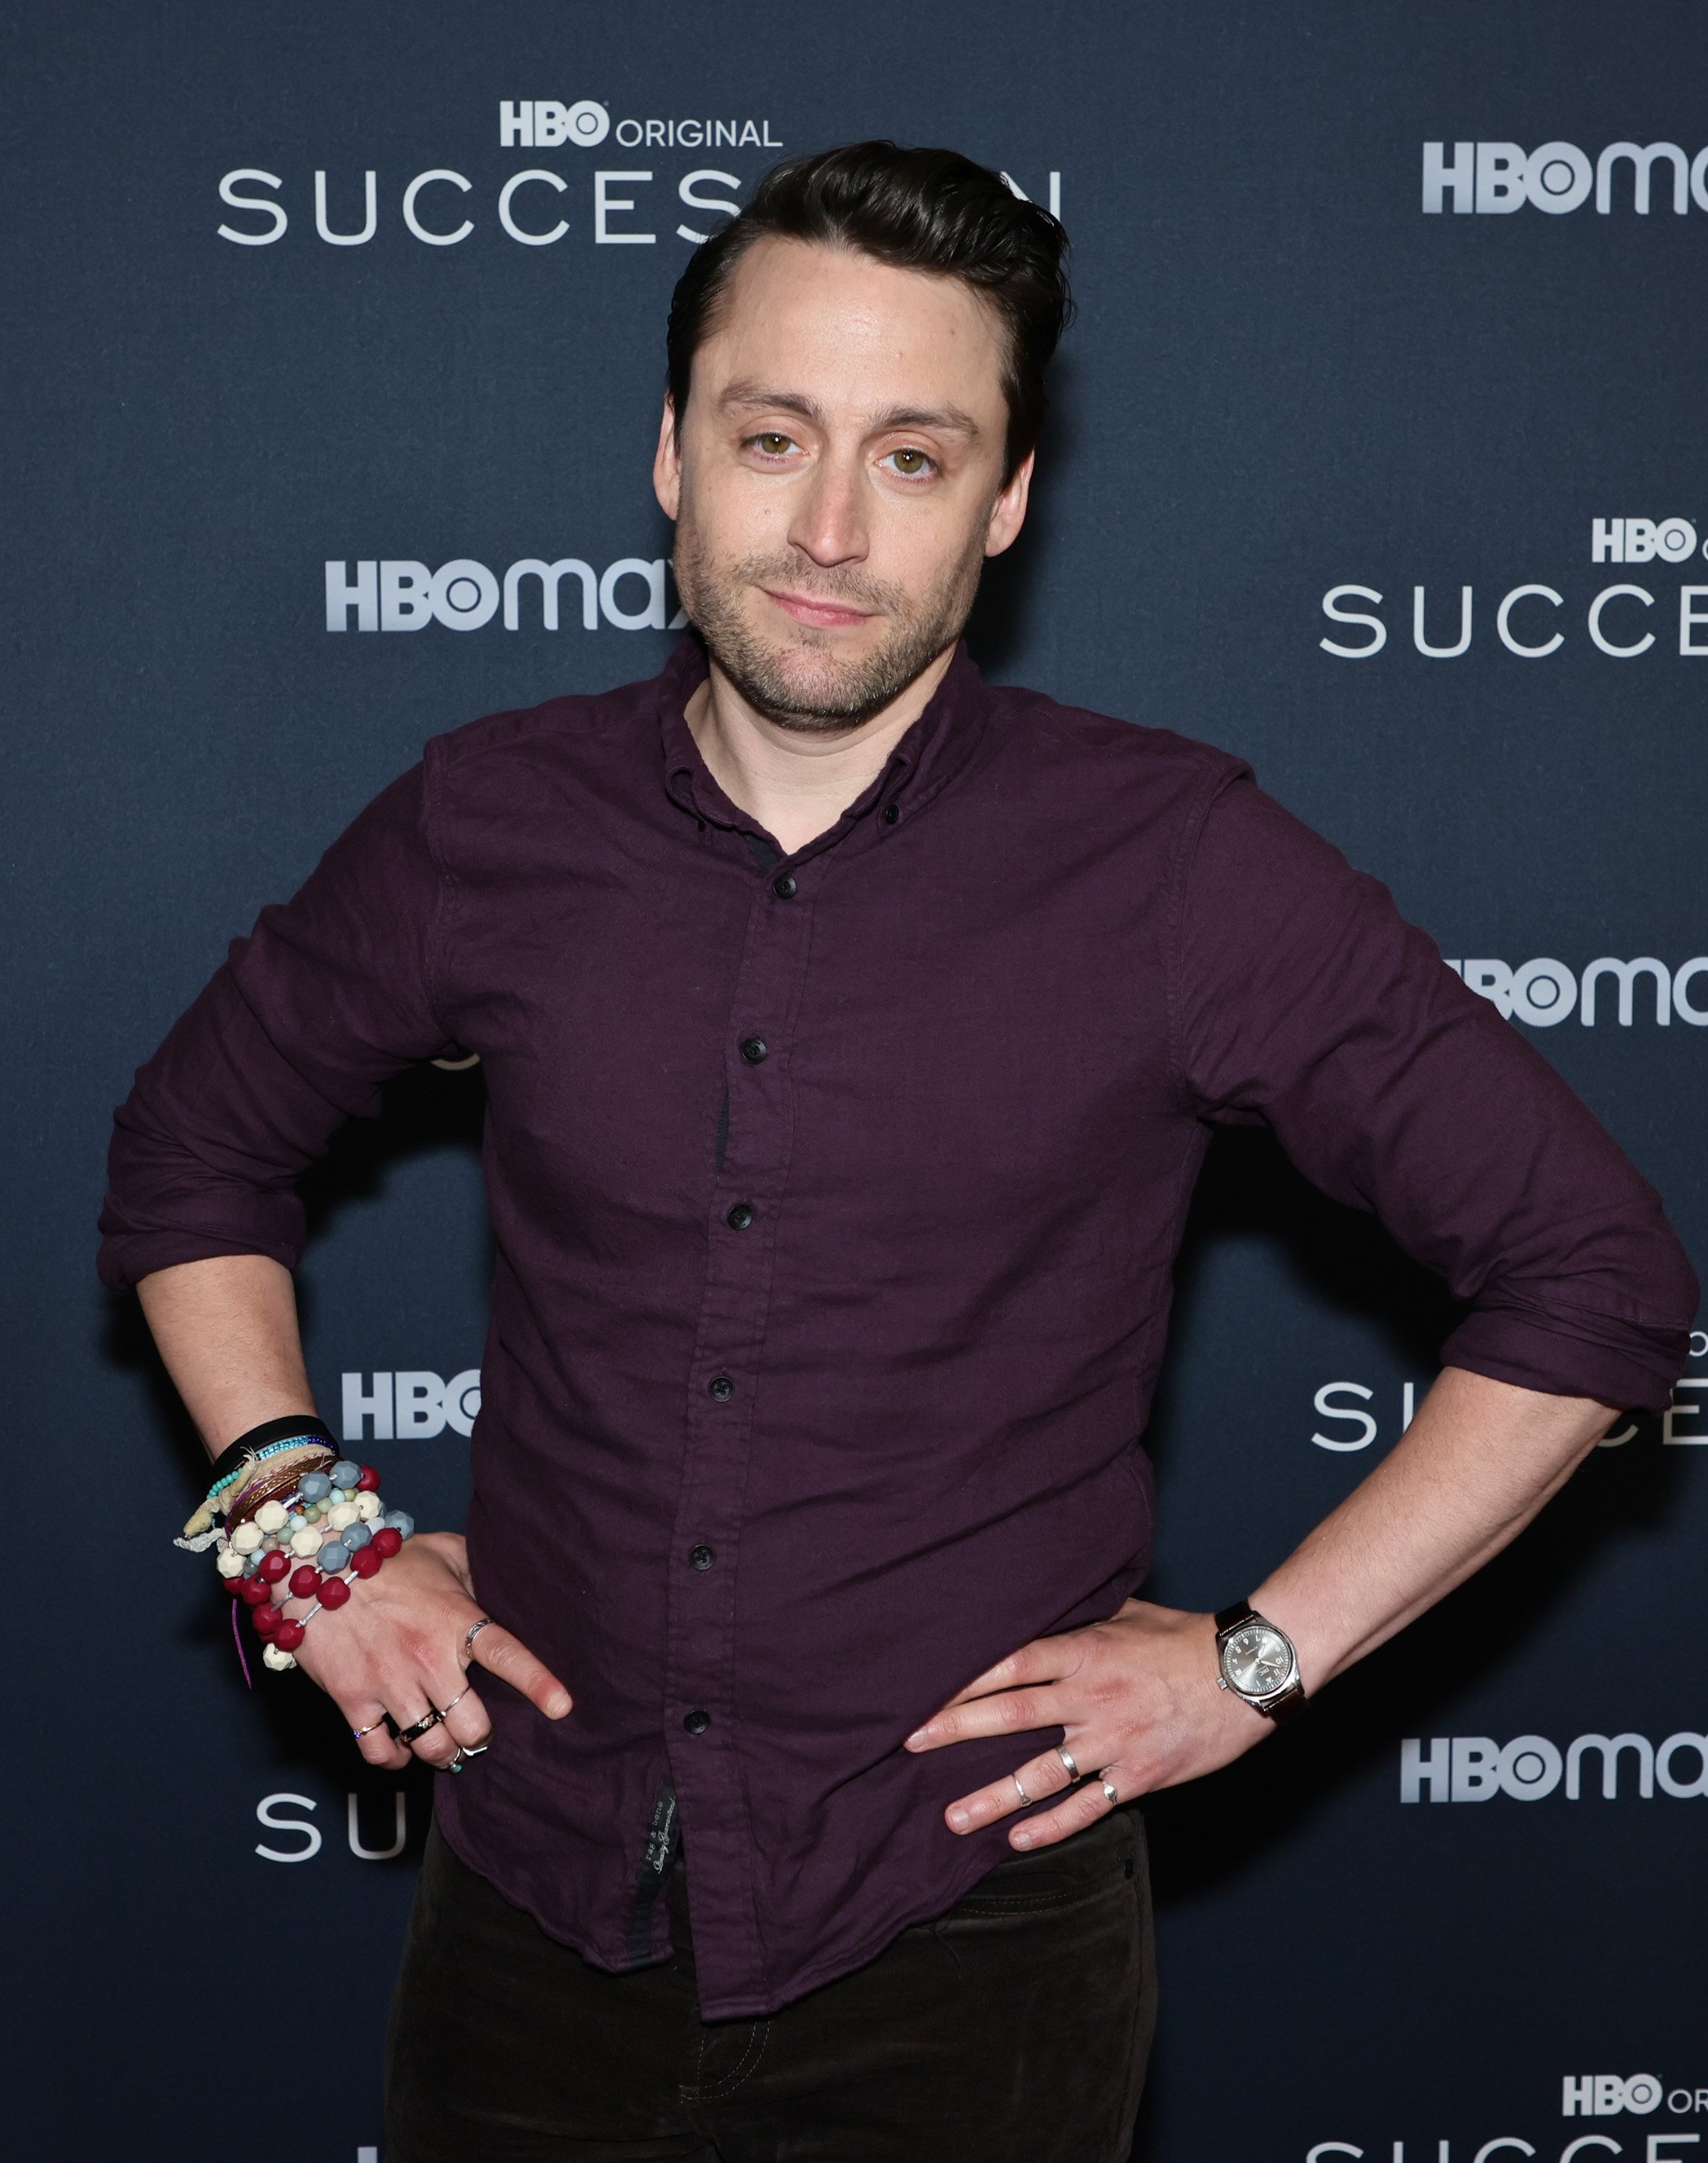  Kieran Culkin attends the "Succession" Emmy FYC Screening & Panel on June 13, 2022 in New York City. | Source: Getty Images